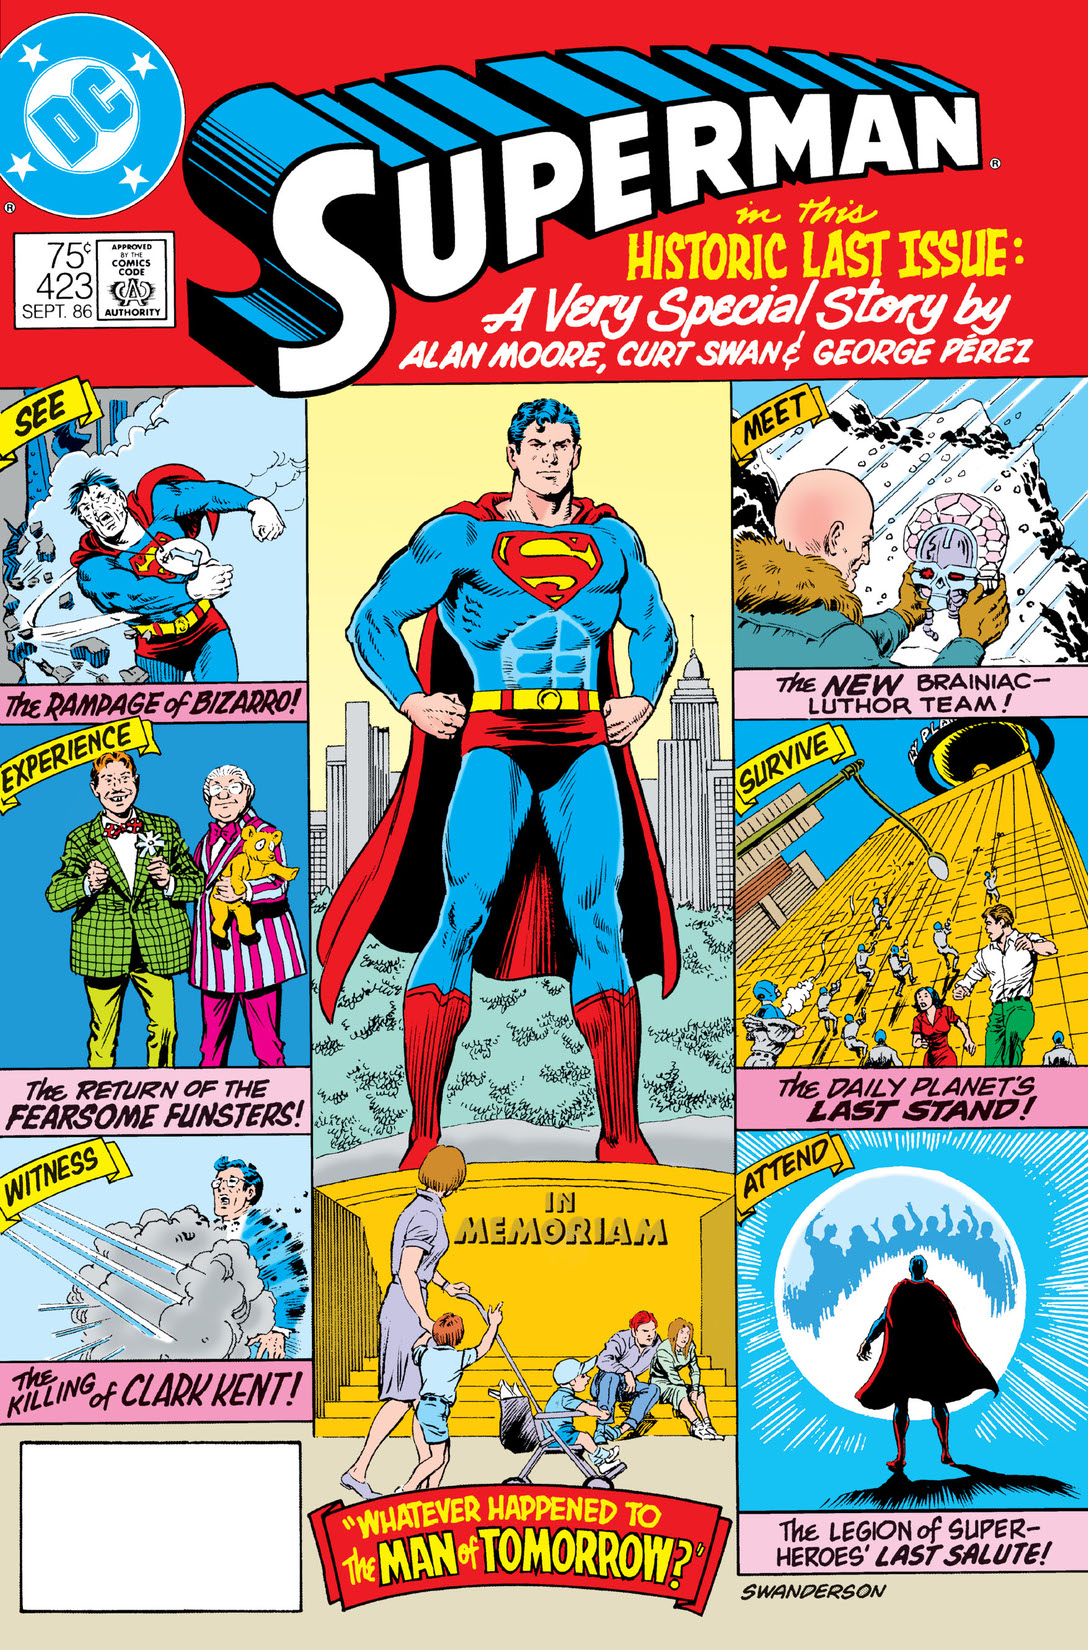 Superman (1939-) #423 preview images